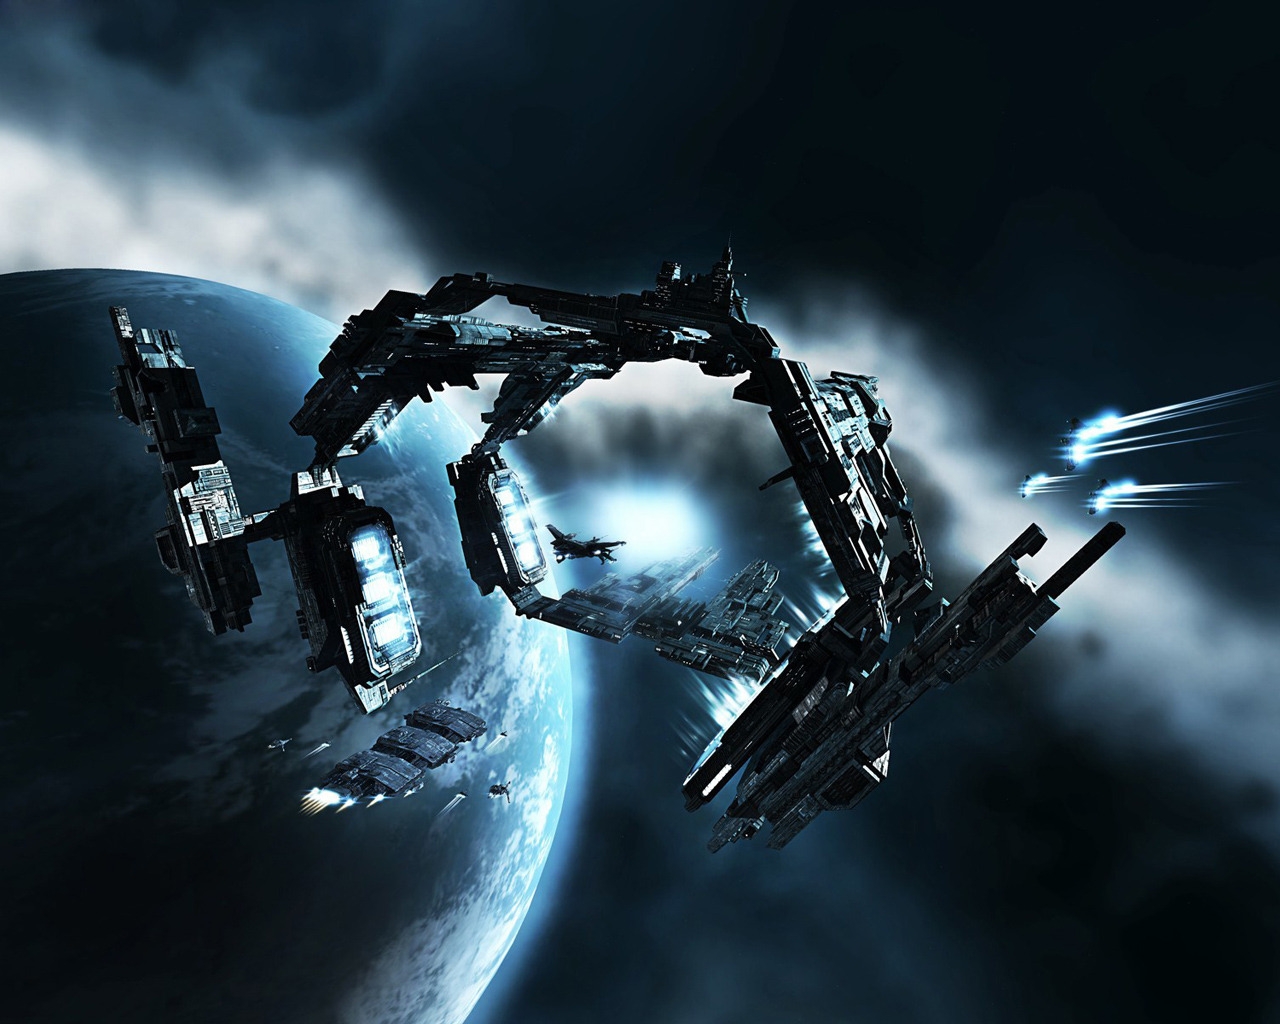 Eve Station for 1280 x 1024 resolution